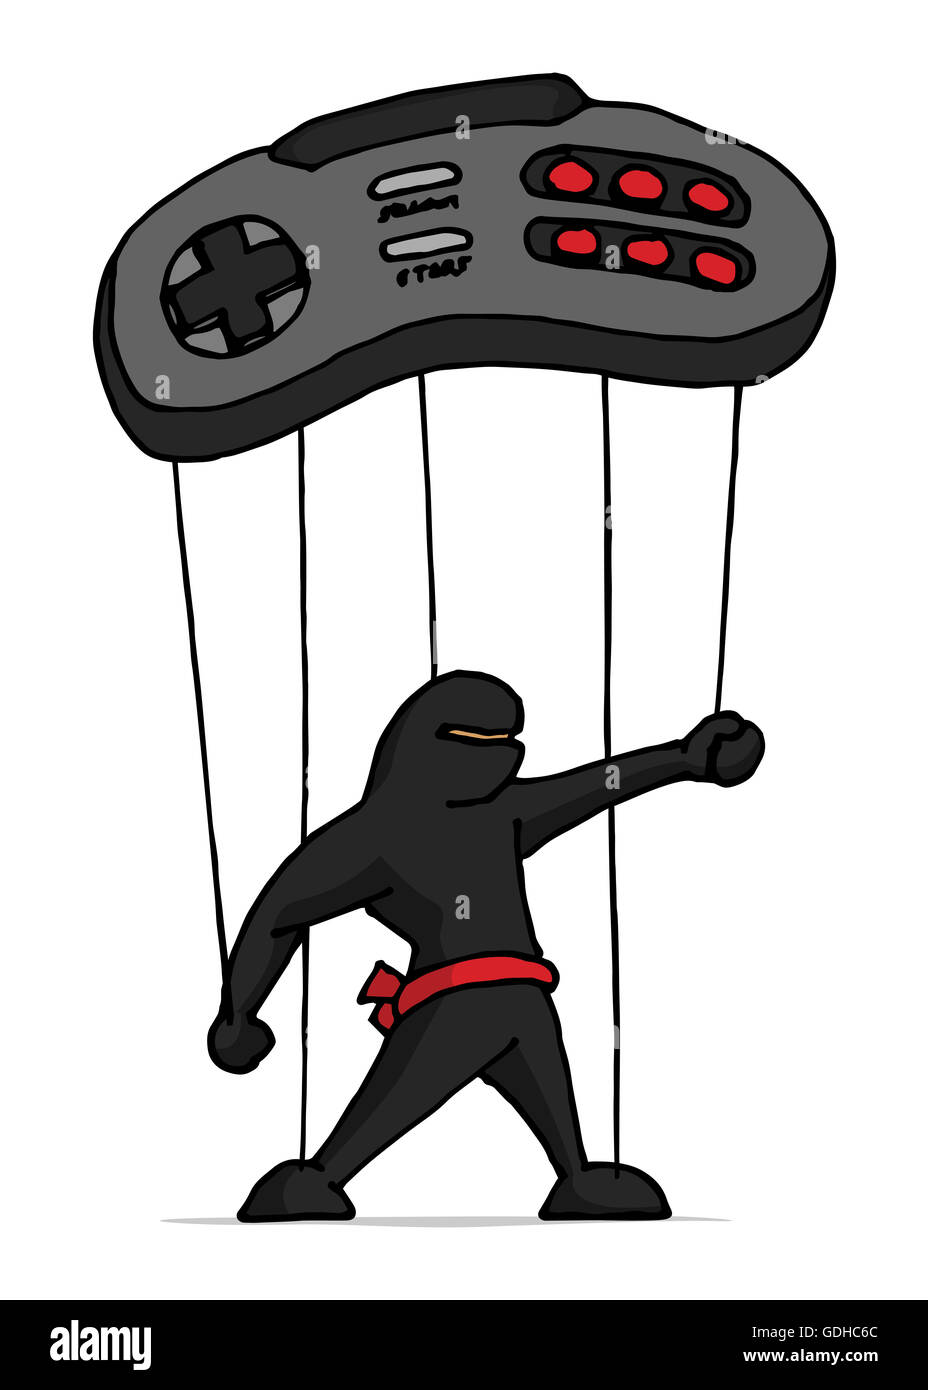 Cartoon illustration of ninja marionette controlled by game controller Stock Photo